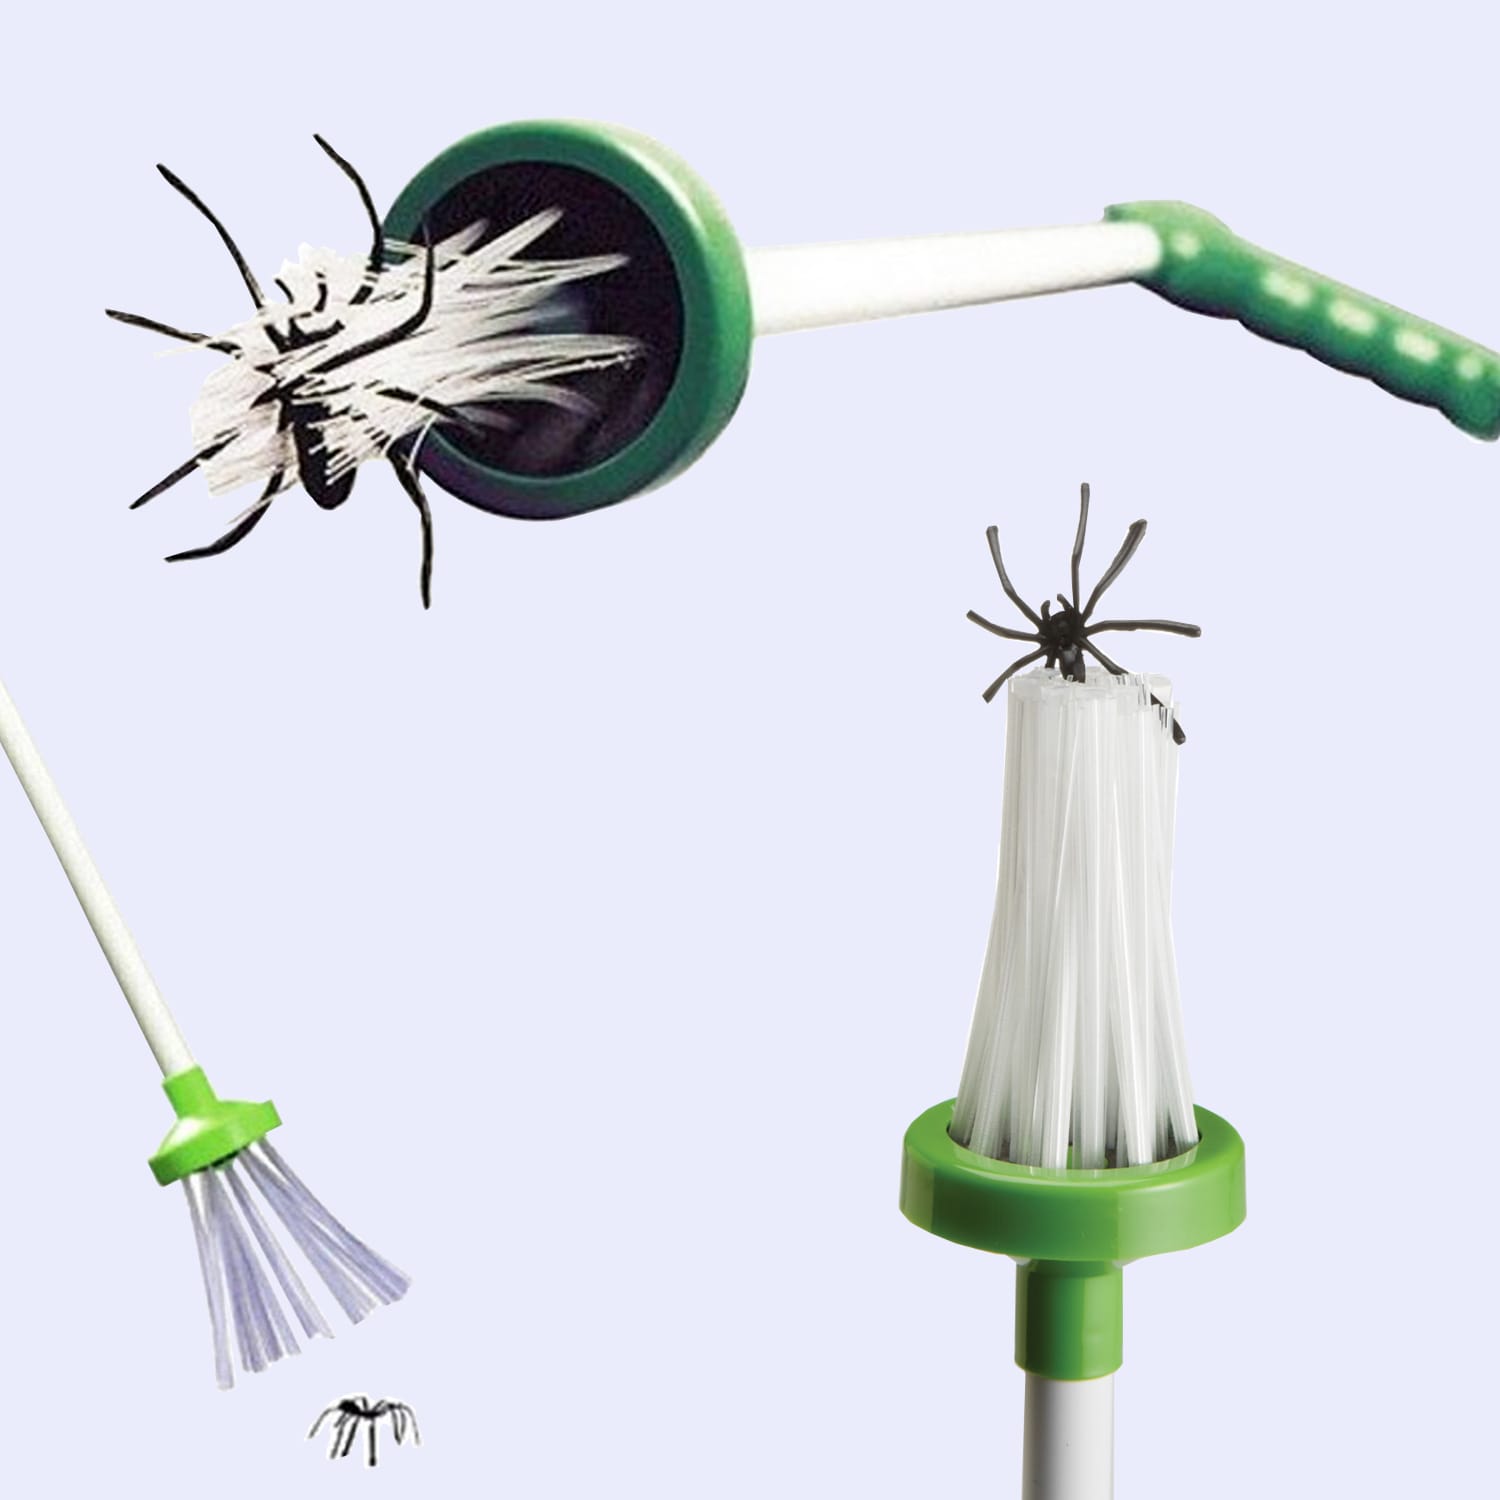 This Humane Spider Catcher is the Perfect Tool for Arachnophobic